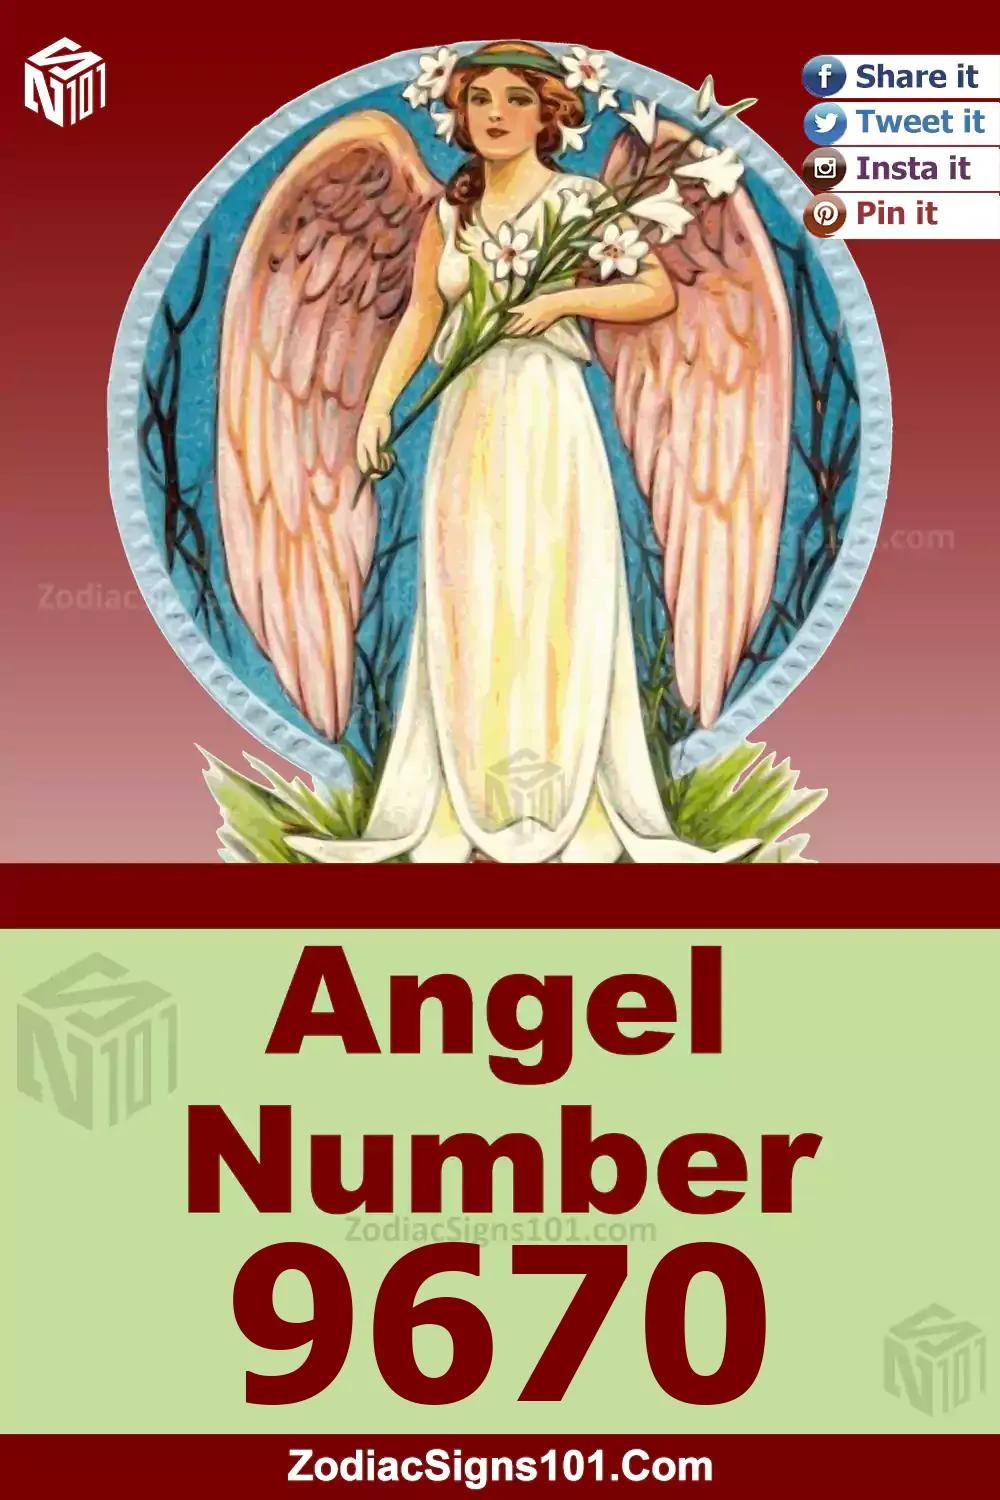 9670 Angel Number Meaning